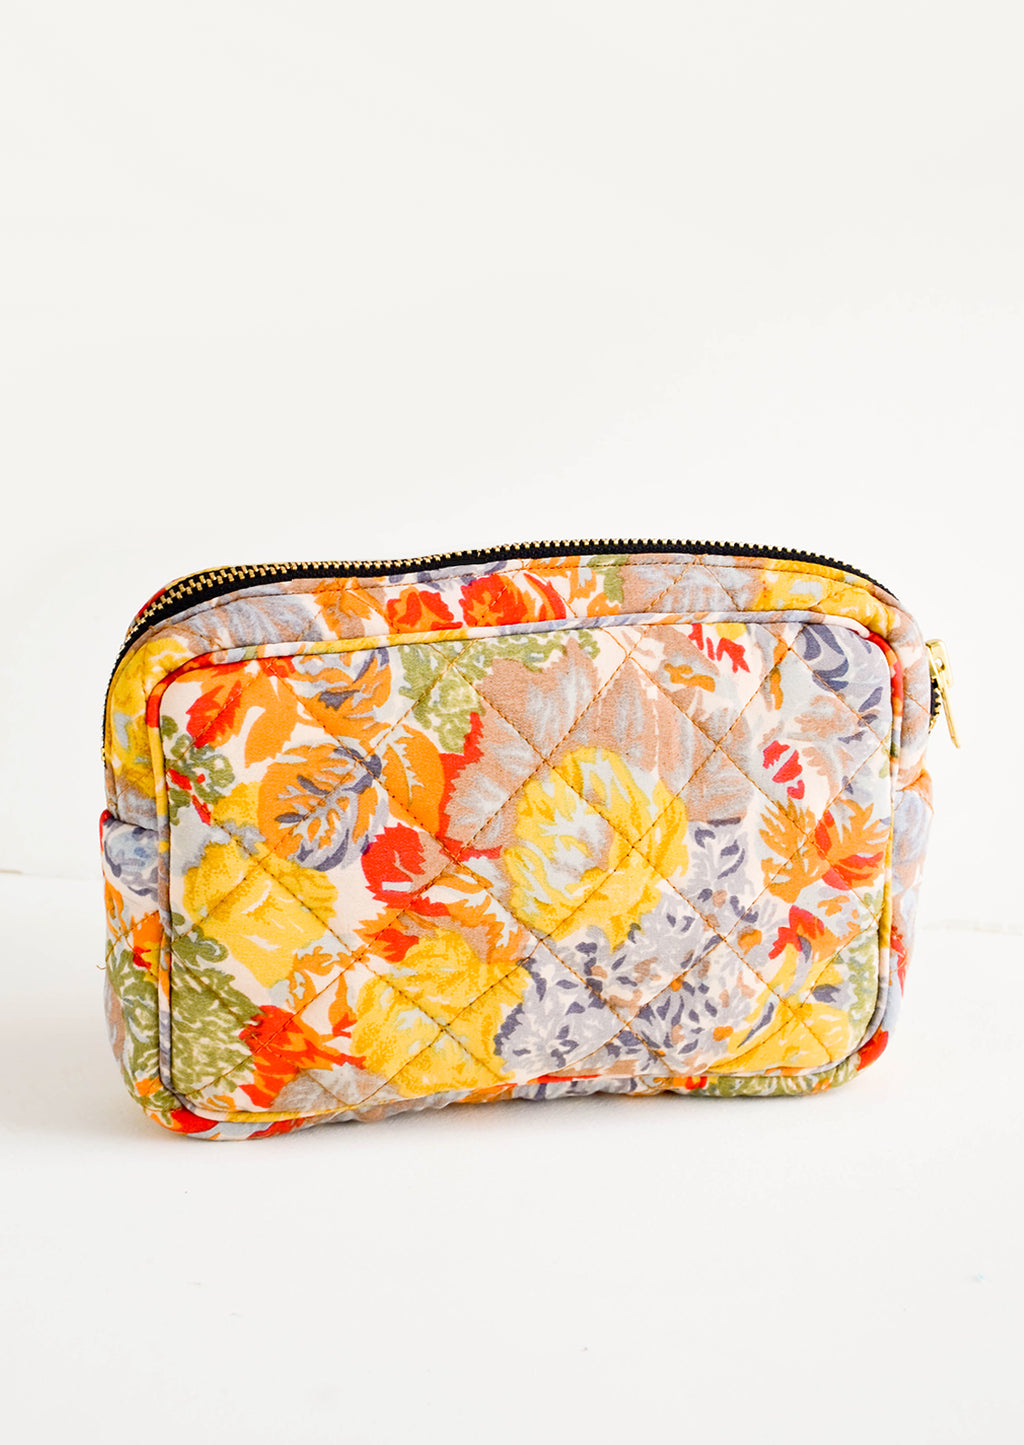 Small / Floral Multi: Flat and rectangular makeup travel bag with zip closure in colorful floral print